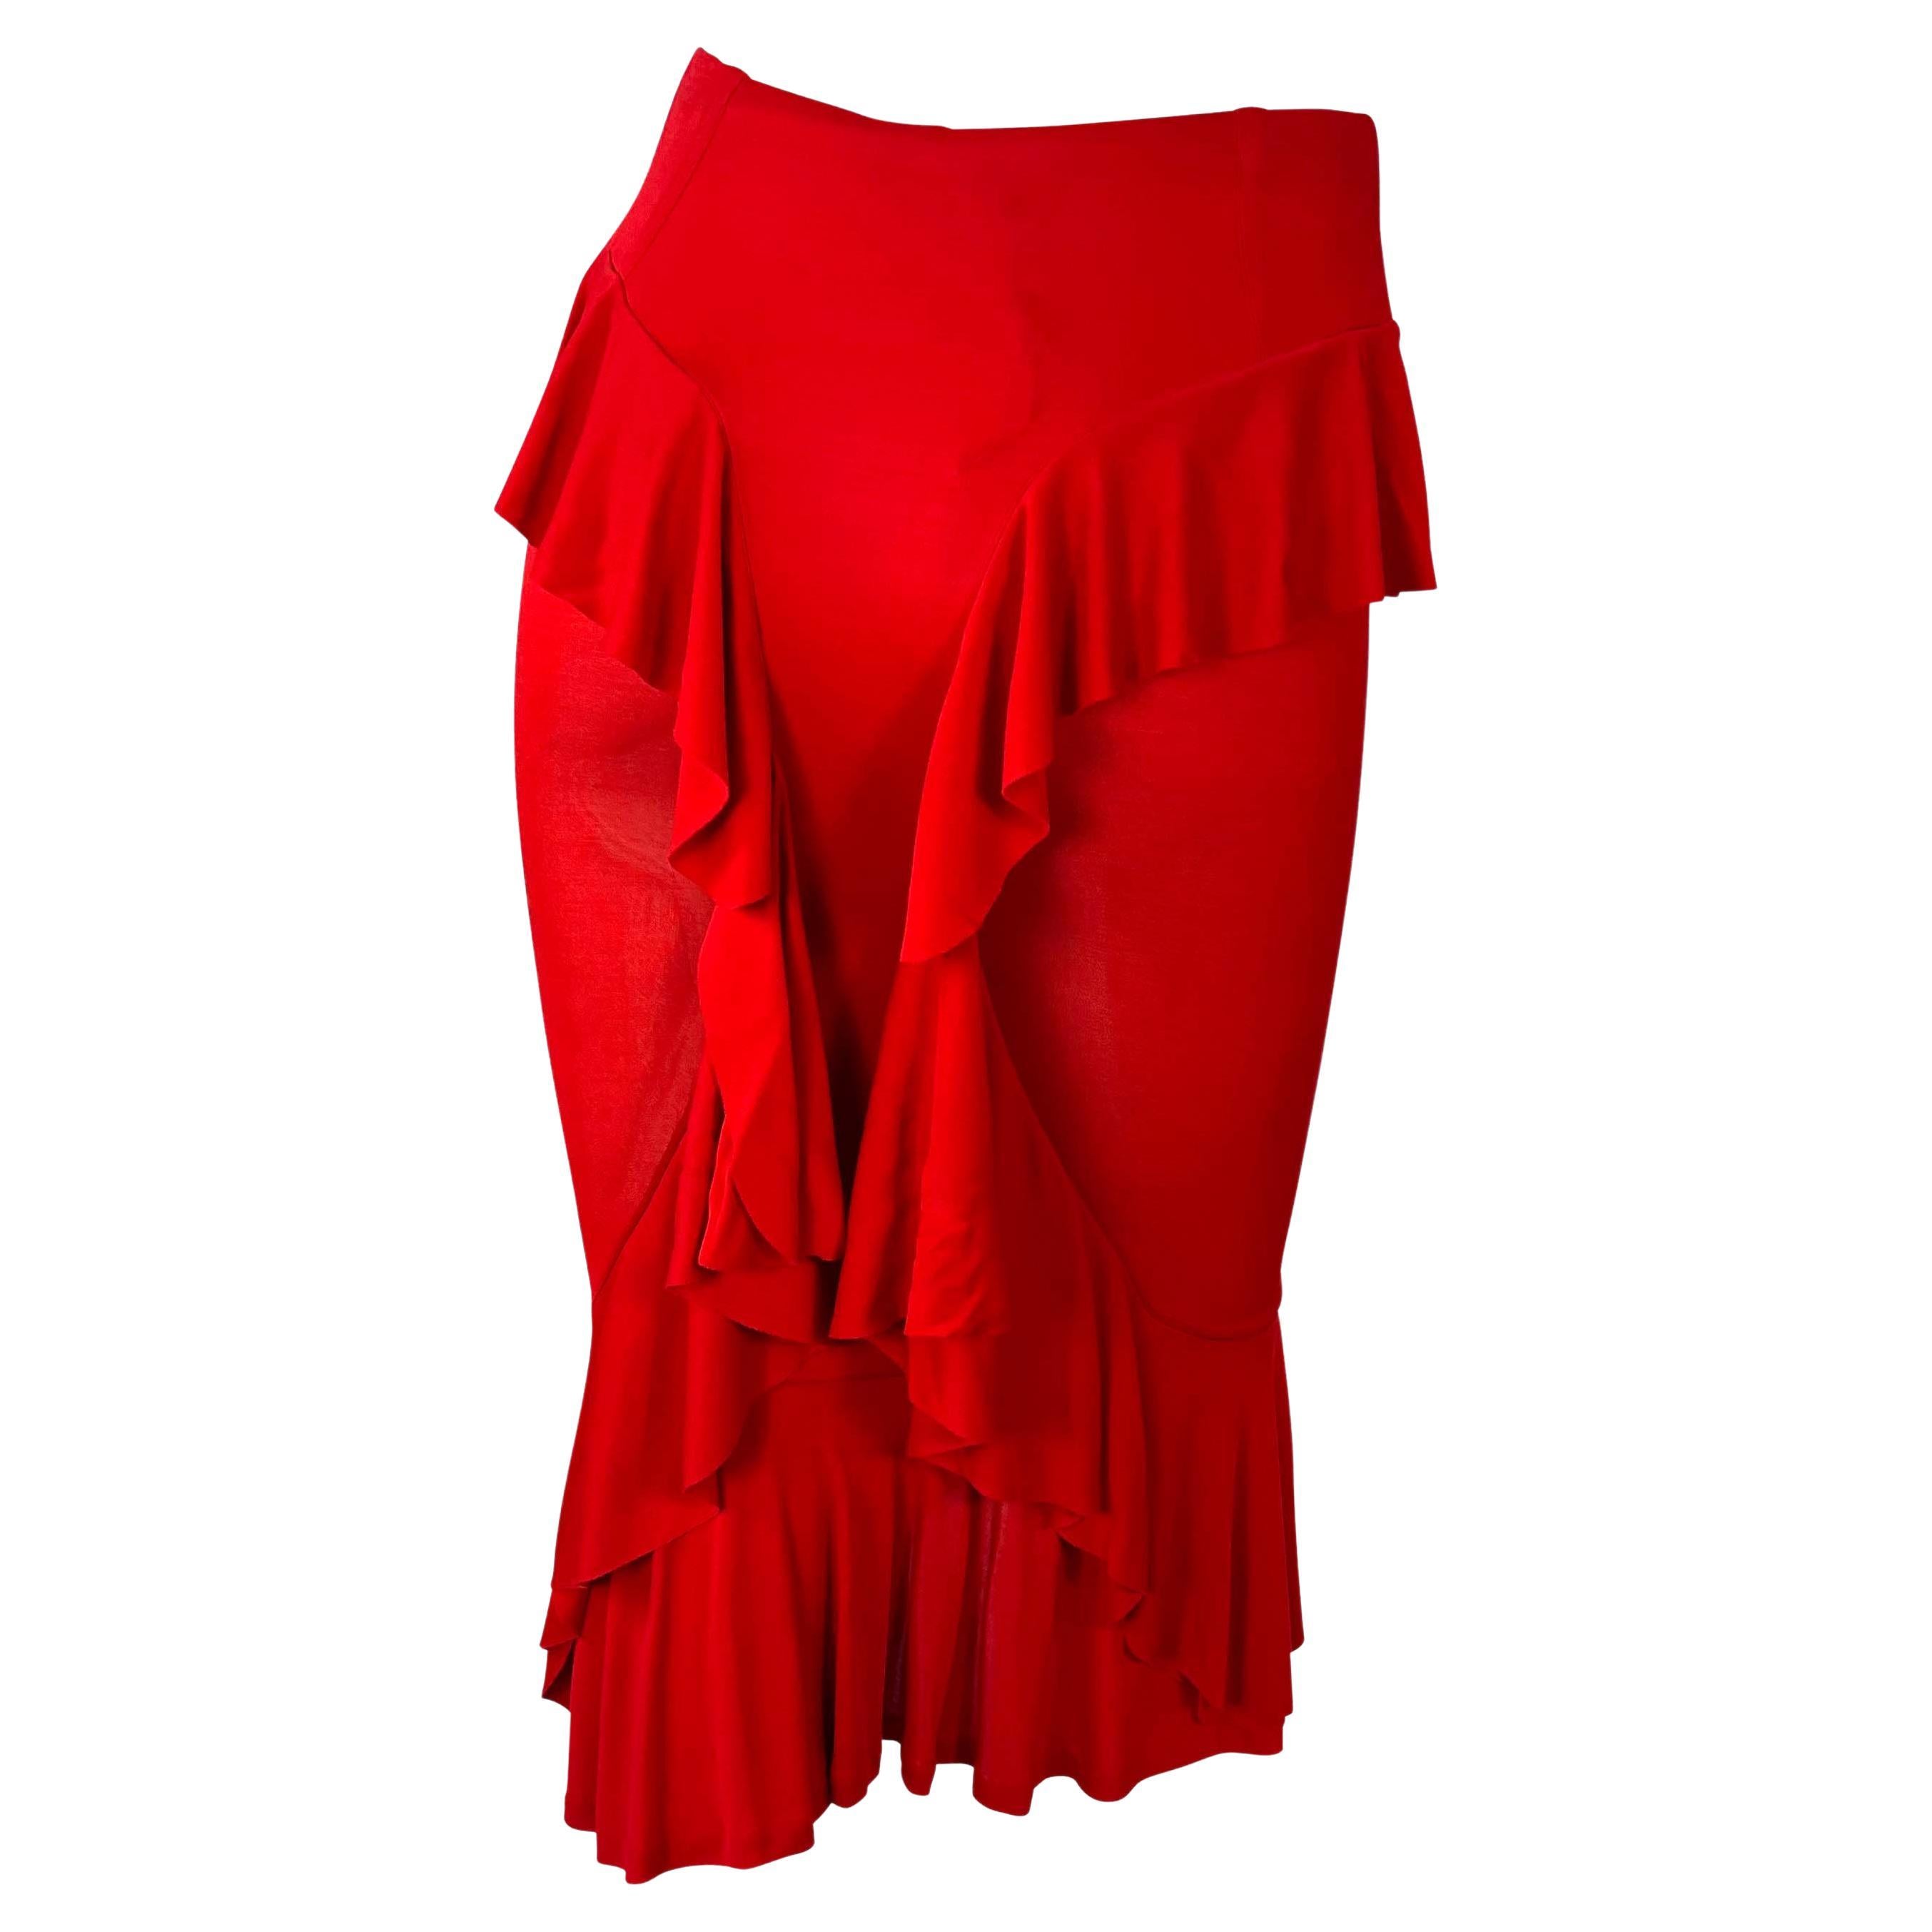 F/W 2003 Yves Saint Laurent by Tom Ford Red Stretch Sheer Ruffle Skirt In Excellent Condition For Sale In West Hollywood, CA